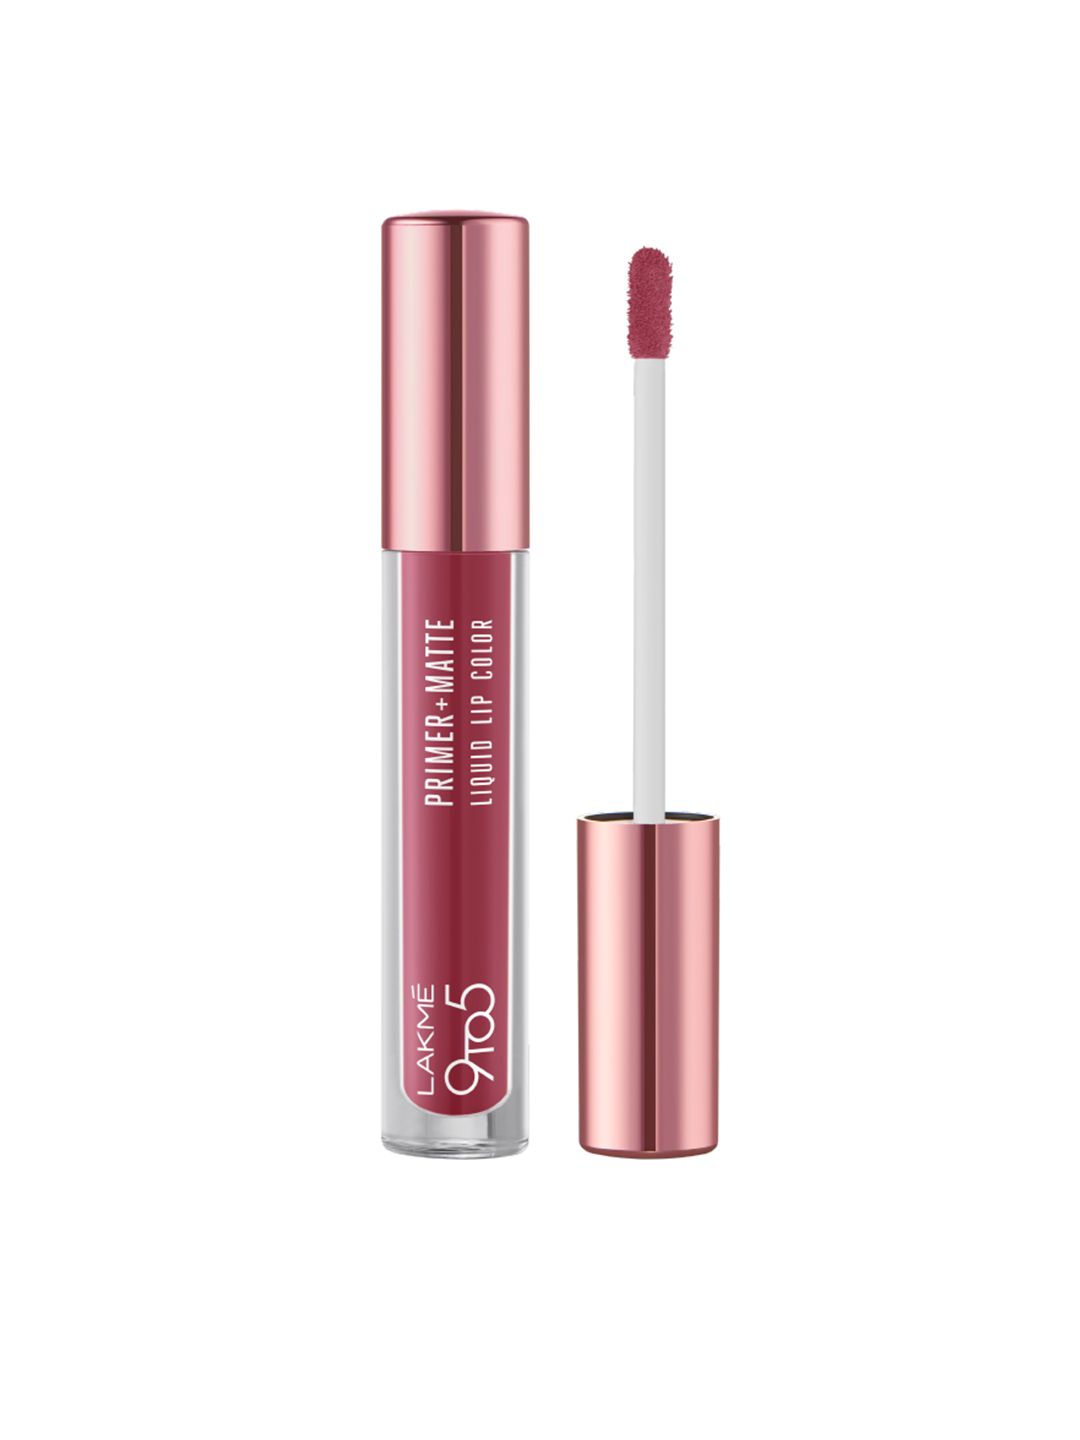 Lakme 9to 5 Primer+Matte Liquid Lip Color with Vit-E and Argan Oil 4.2ml-Everyday Pink MP1 Price in India